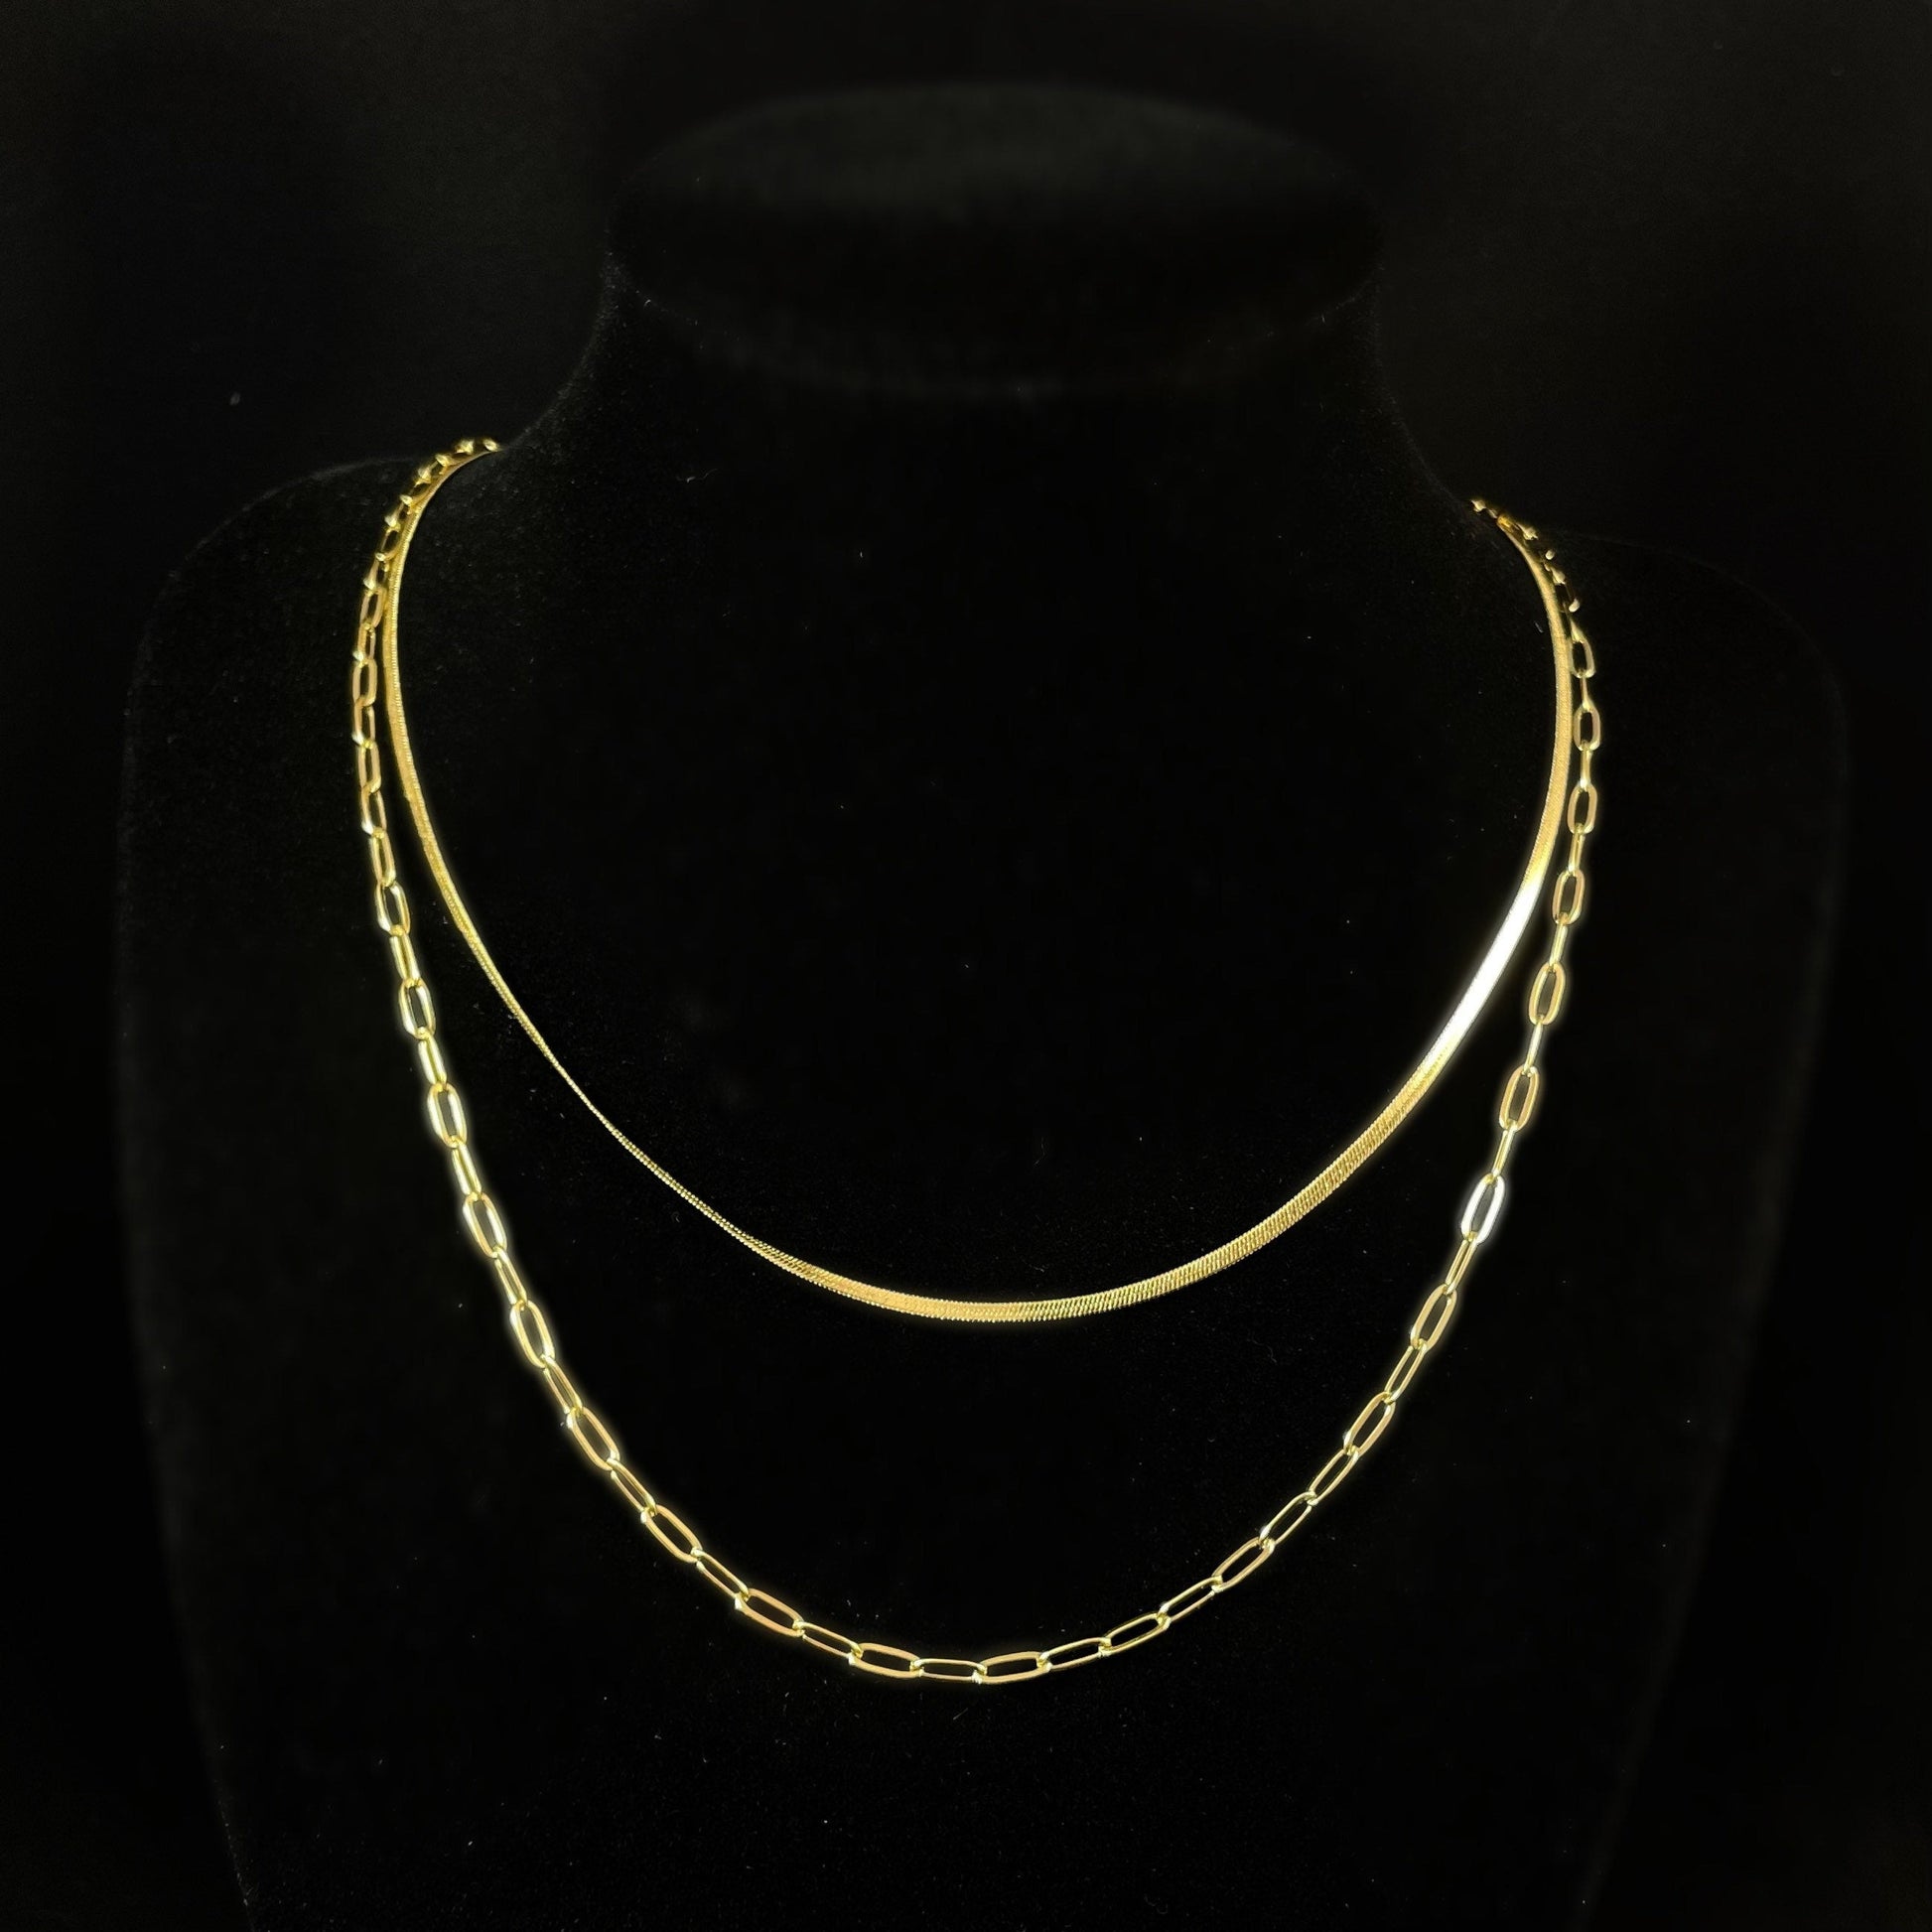 Multi Strand Gold Chain Necklace - Handmade in Spain